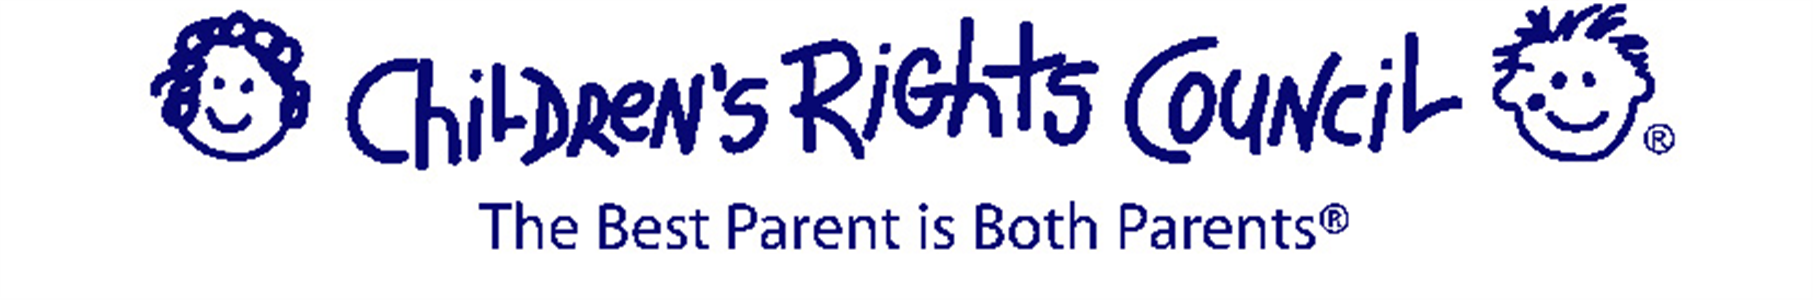 Children's Rights Council